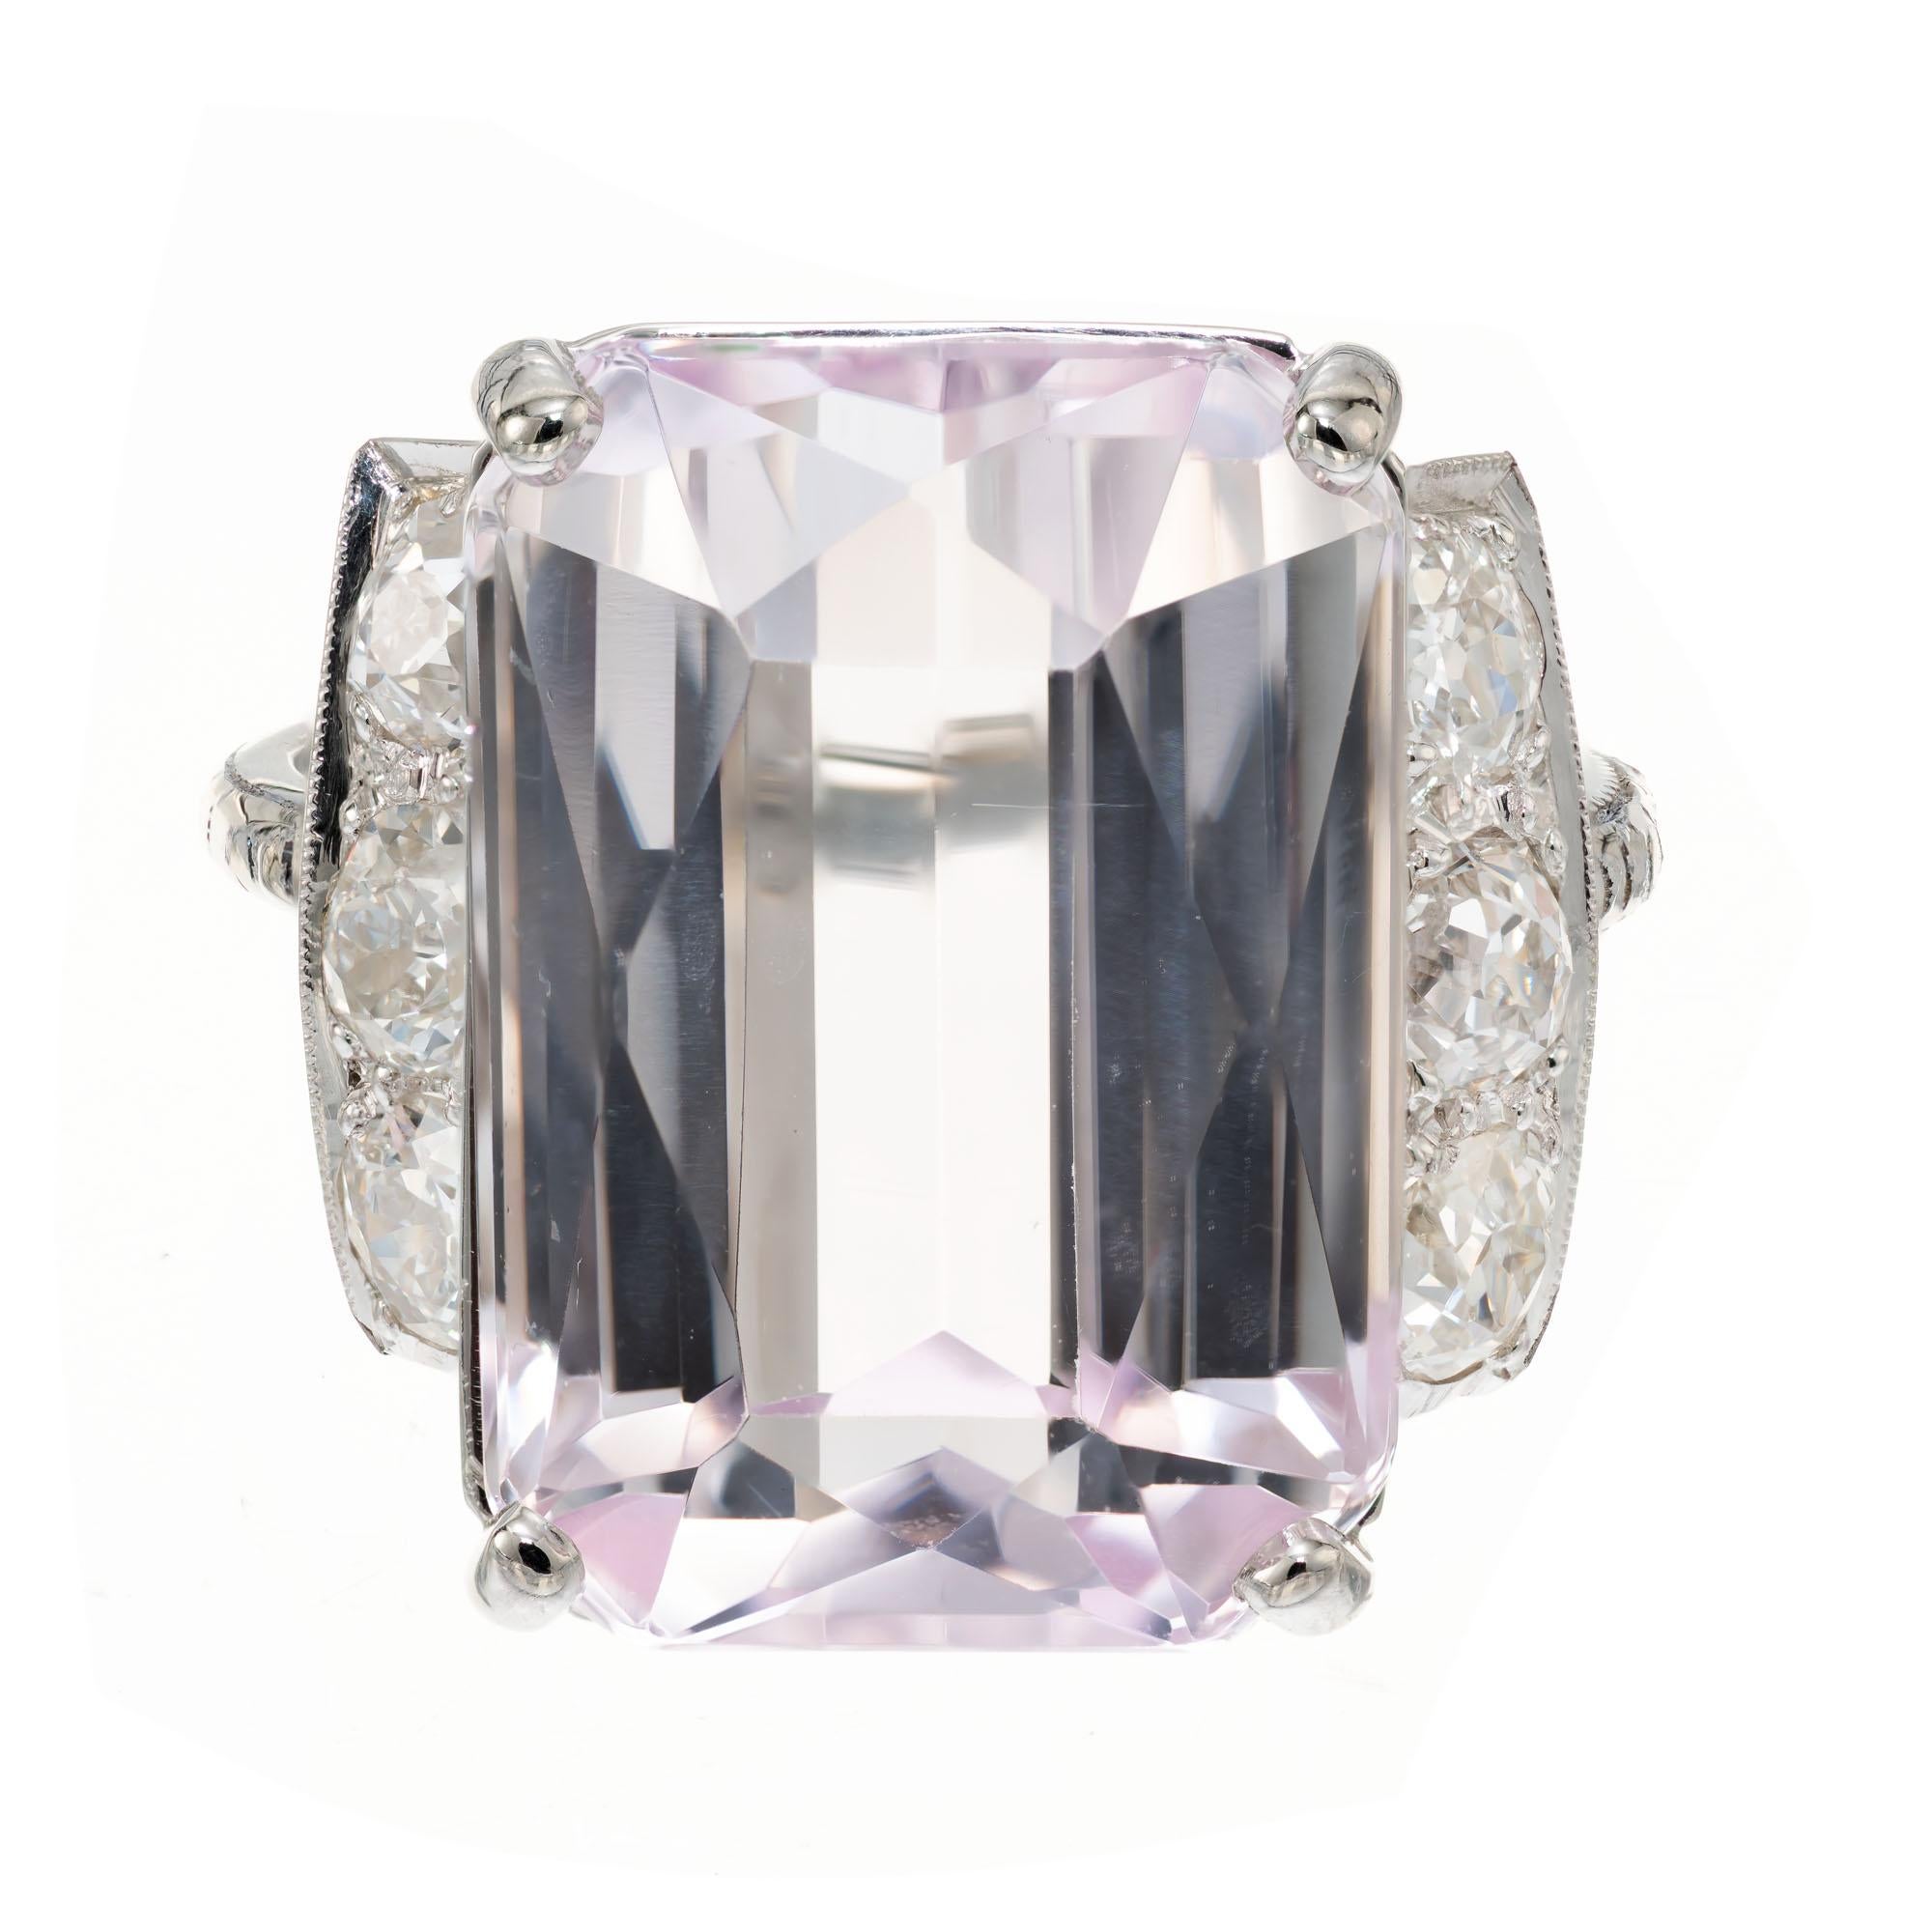 Vintage 1930's Art Deco carat kunzite and diamond ring. 17.01 carat emerald cut pink kunzite center stone in a platinum 18k white gold cocktail setting with 6 old mine cut accent diamonds. The crown is platinum and the shank is 18k white gold.  

1